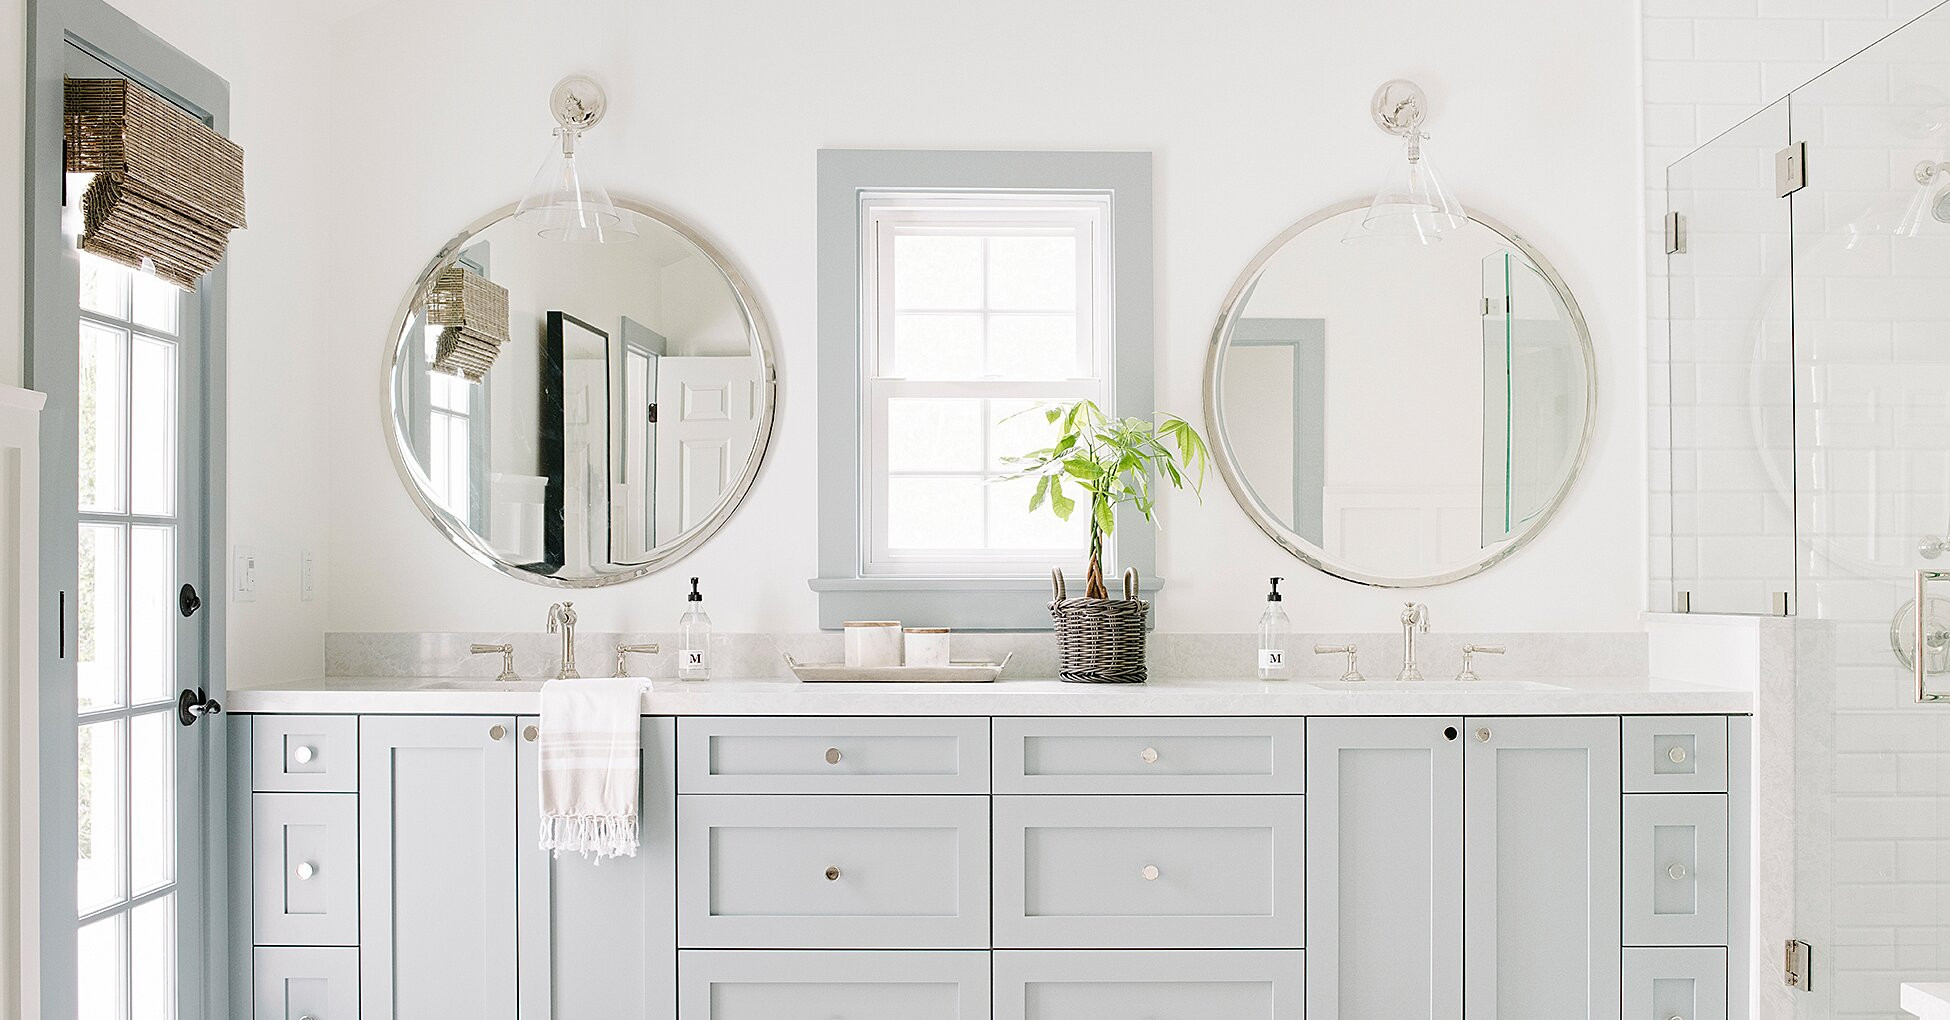 Popular Bathroom Paint Color
 These Are the Most Popular Bathroom Paint Colors for 2020